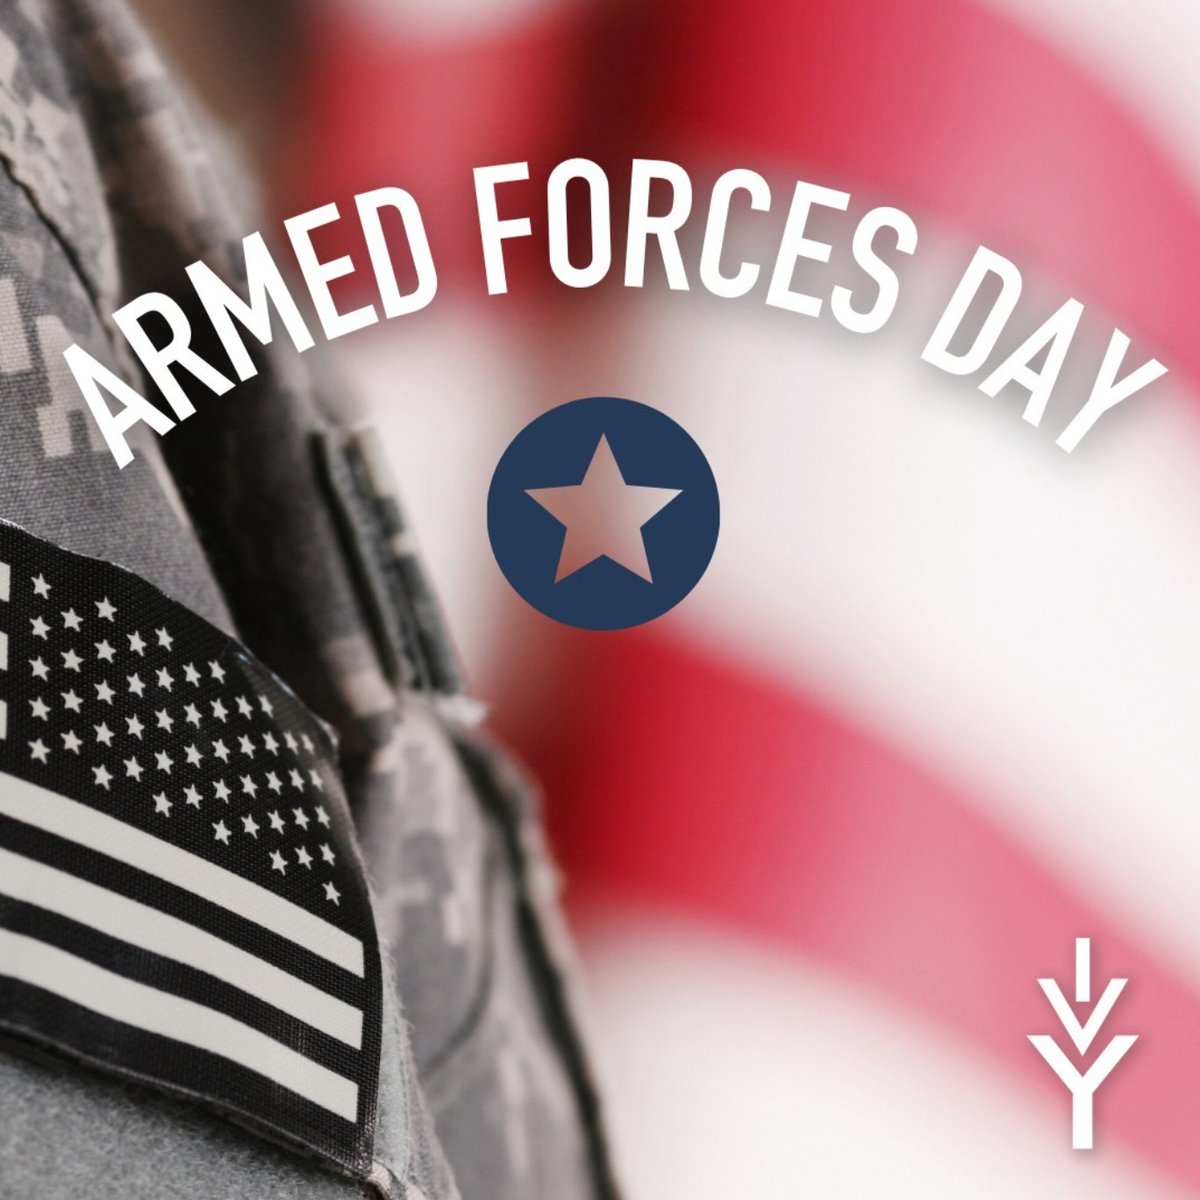 Today is national Armed Forces Day. Our deepest thanks go out to all members and veterans of the United States military. Thank you for your service to our country!

#ArmedForcesDay #IvyTech #USVeterans #USMilitary #StudentVeteran